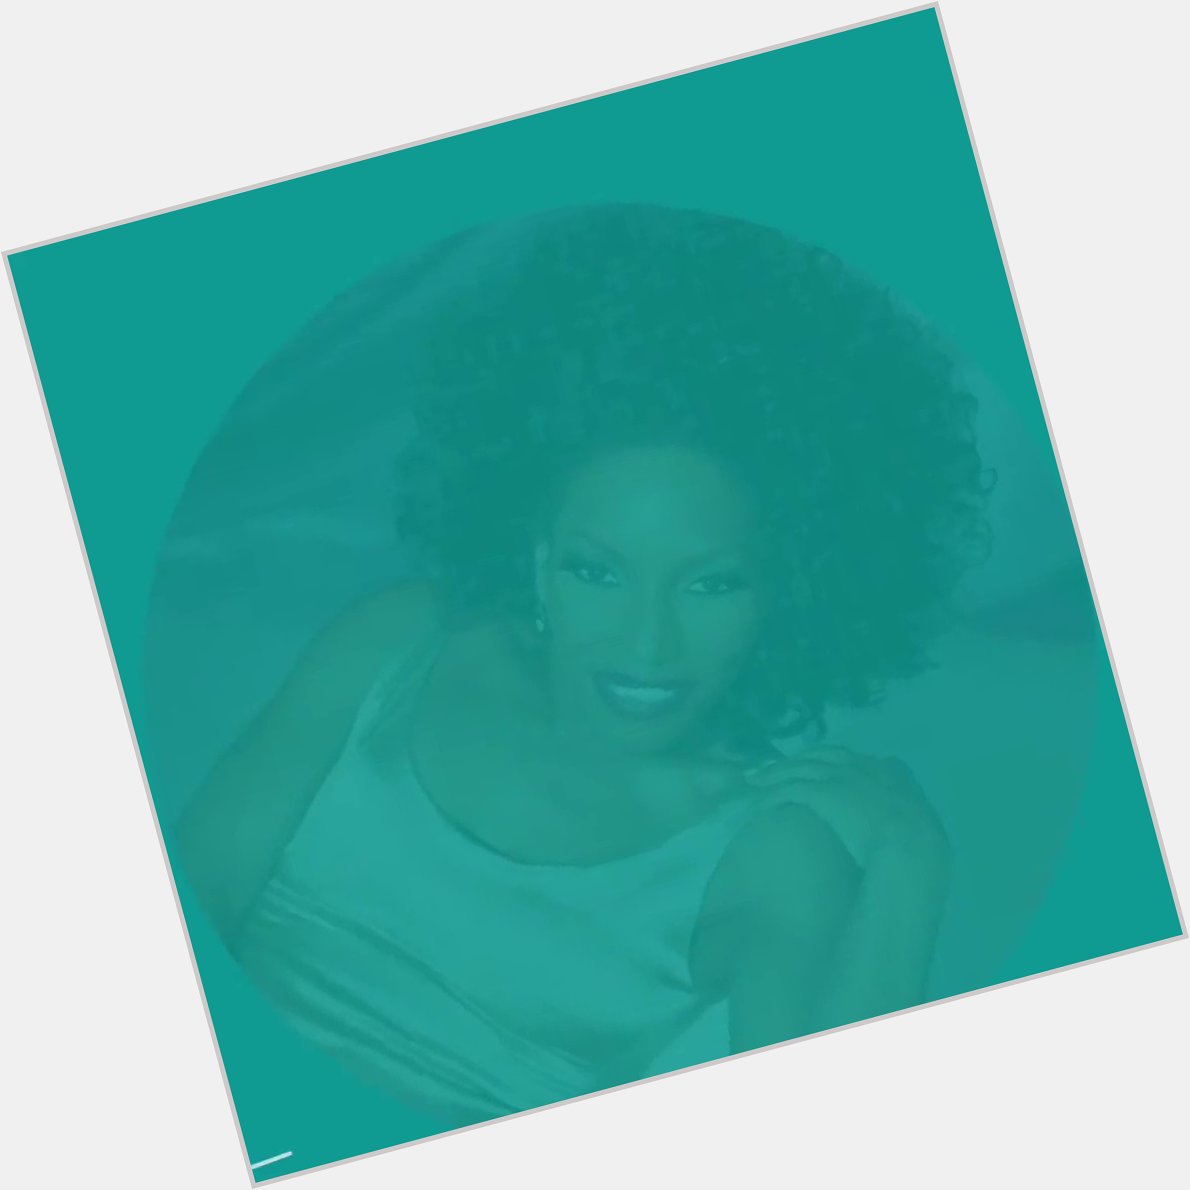 Wishing a Happy, Happy Birthday to the one and only Stephanie Mills 